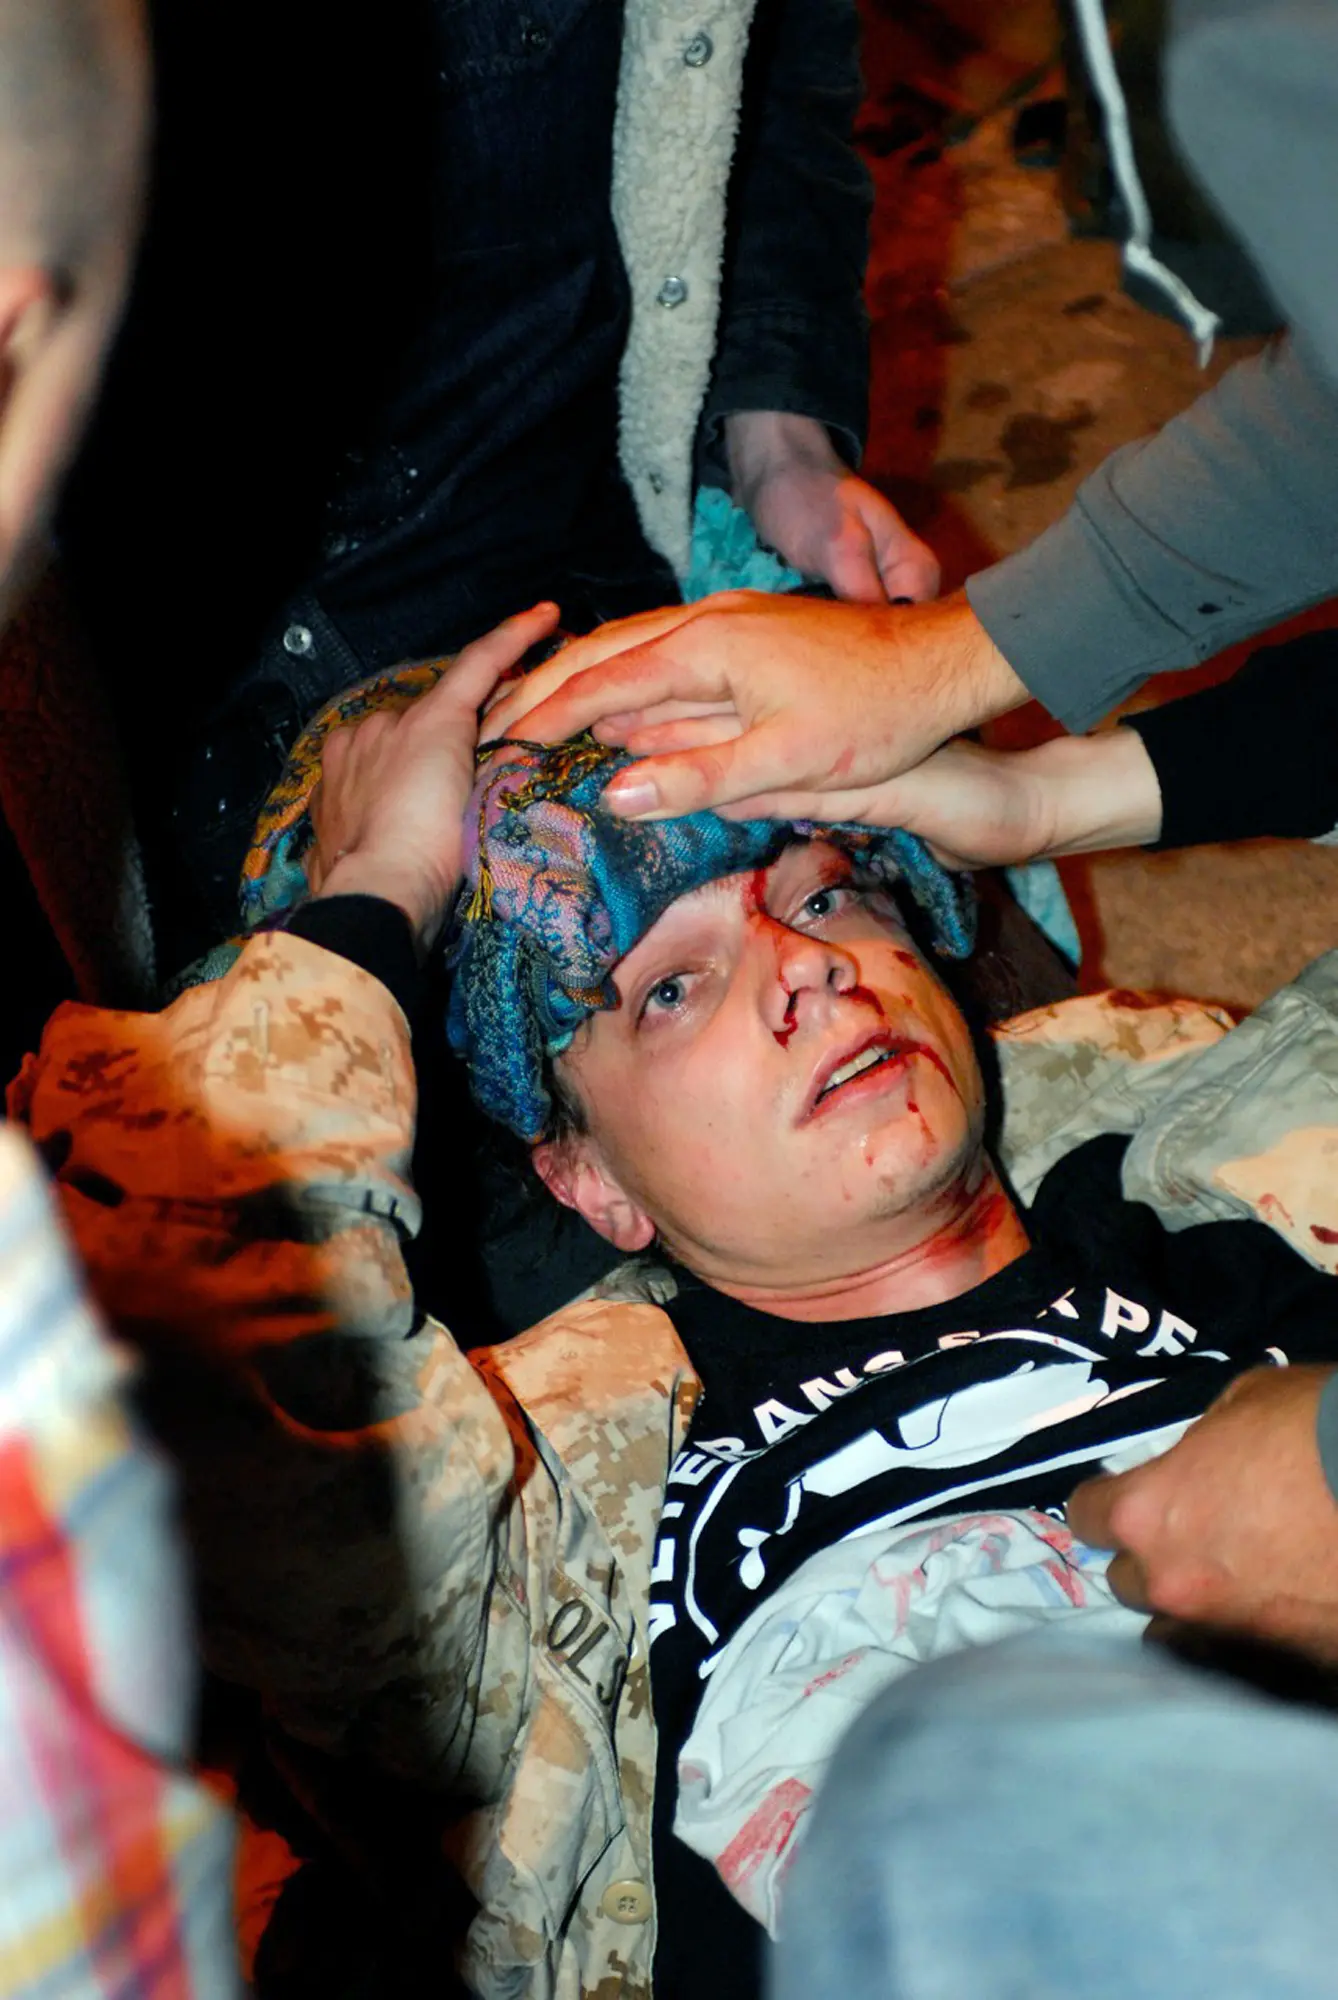 Scott Olsen bleeds from his head as a crowd of people come to his aid.